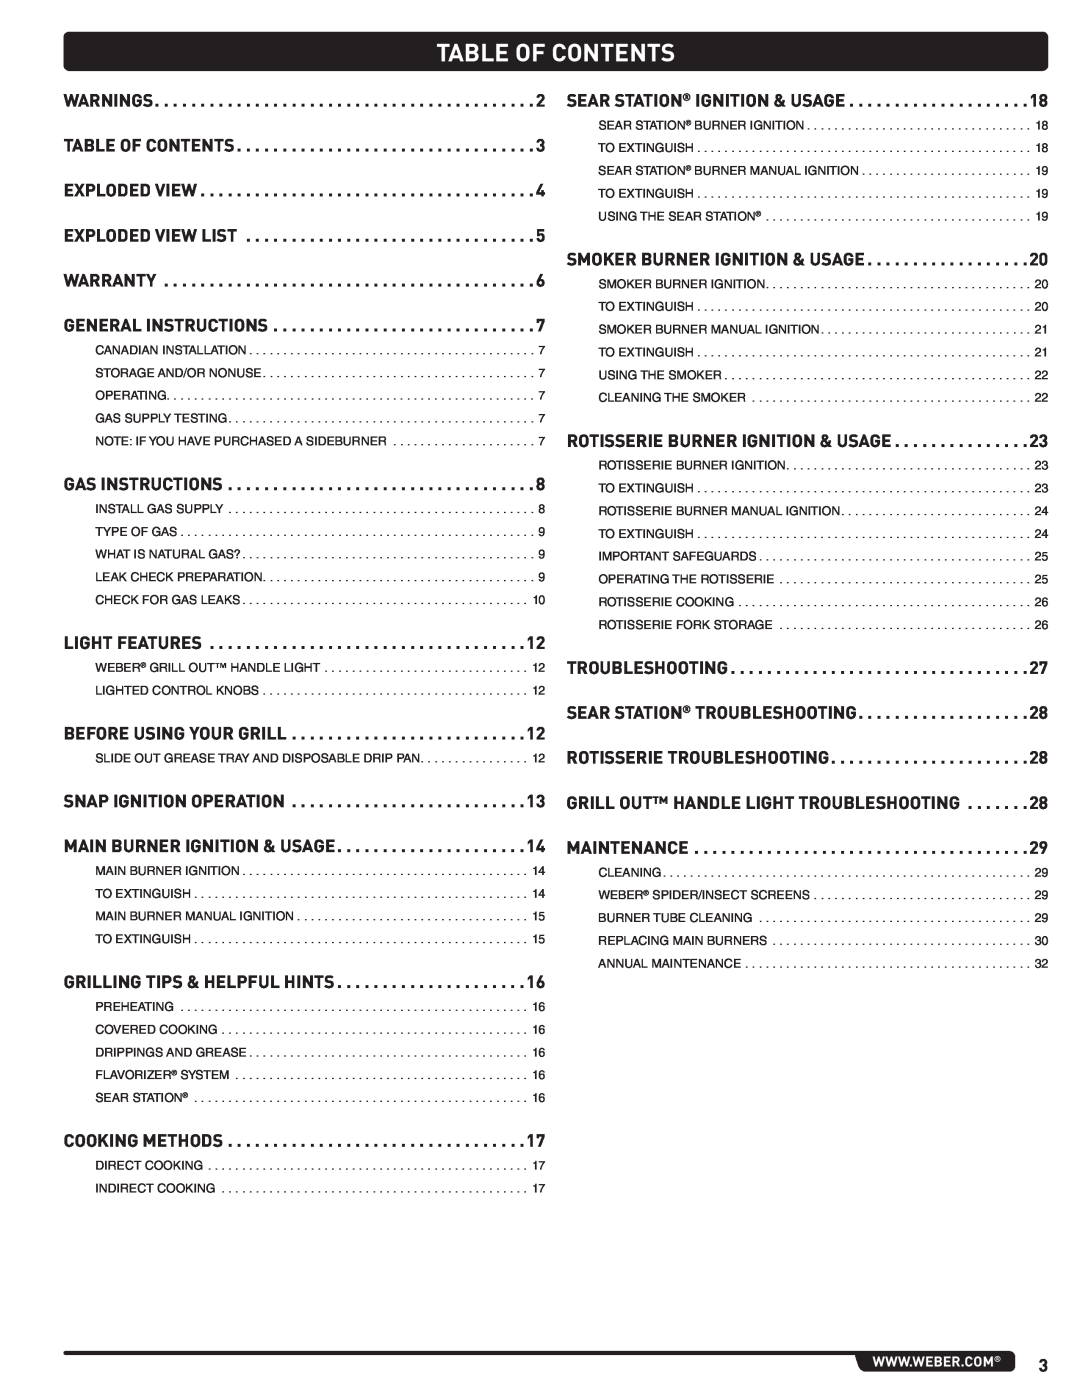 Weber 56576 manual Table Of Contents 